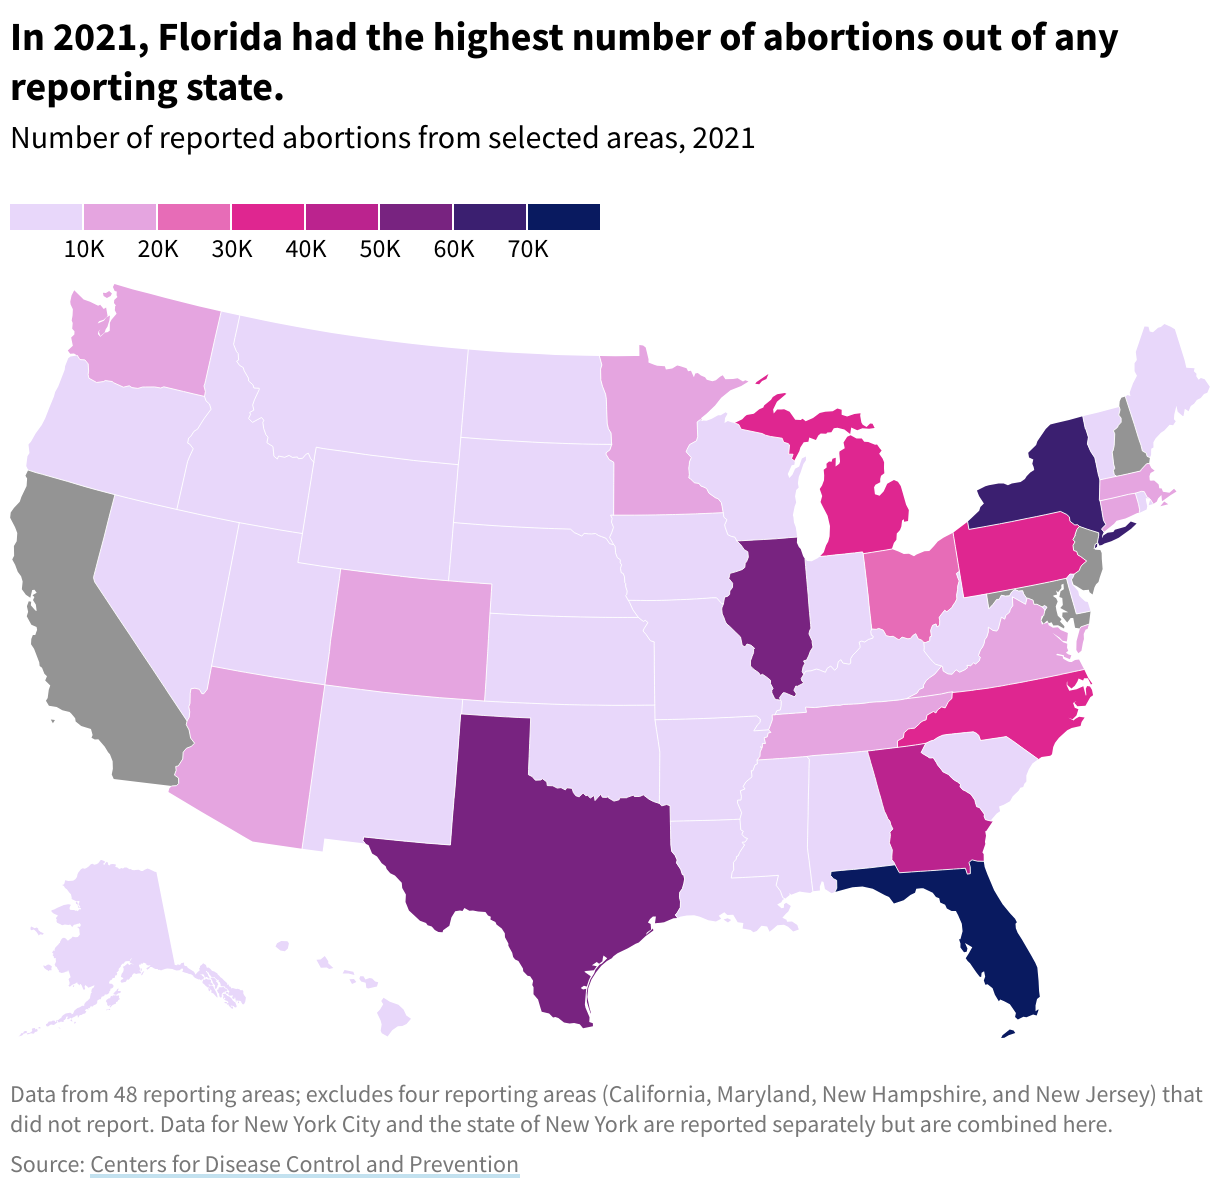 A map of the US illustrating the number of reported abortions by state. 